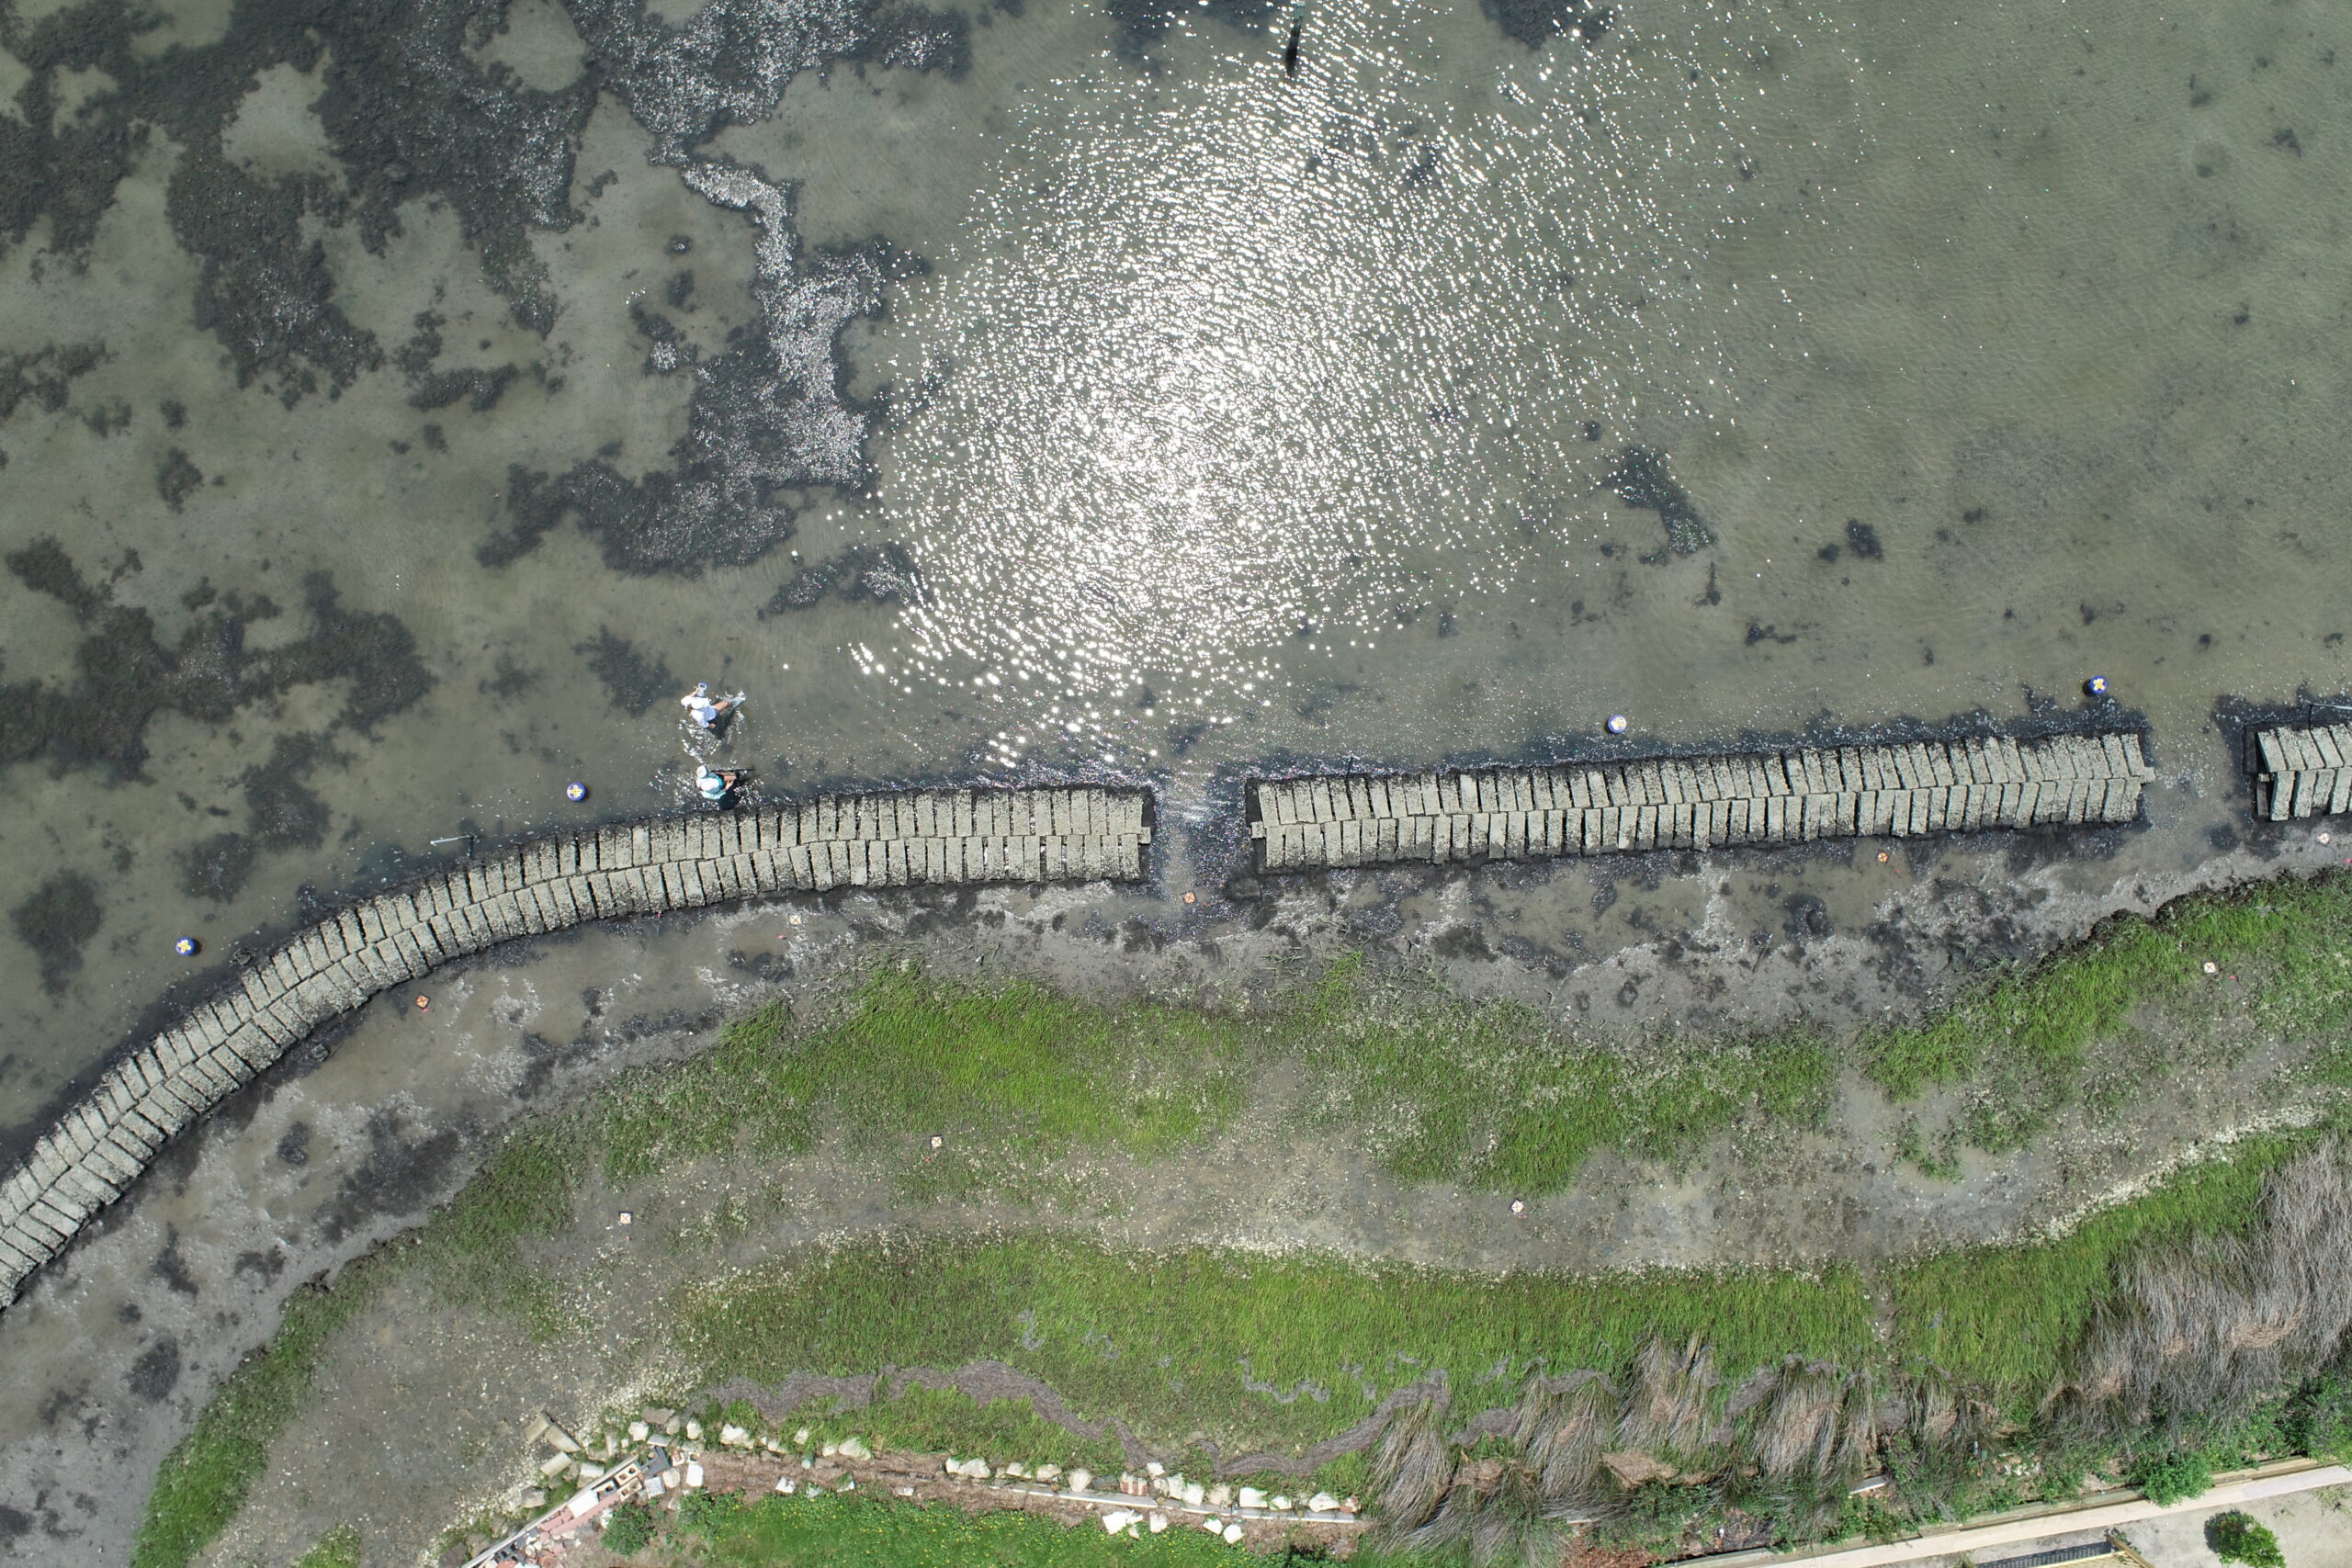 a drone image of a team of ECU researchers working along a restored shoreline near Morehead City, NC